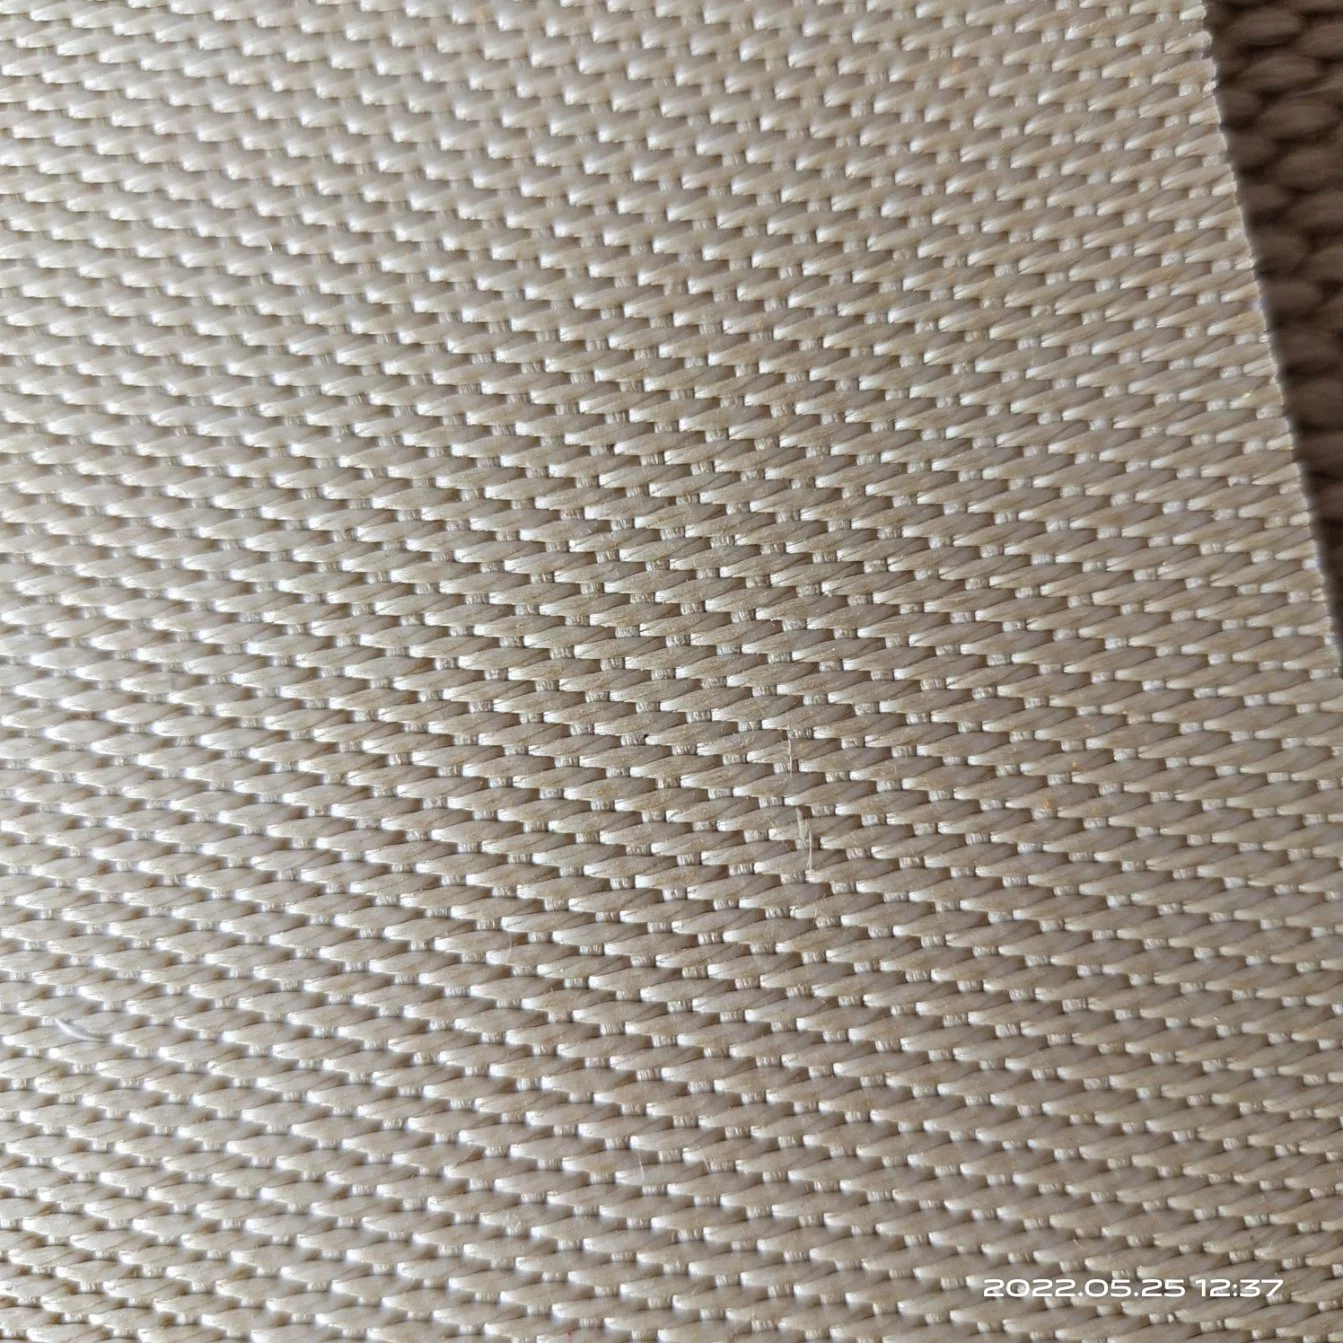 0.45mm 660g 8h Satin Woven 316L Stainless Steel Wire Reinforced Vermiculite Coating Fiberglass Fabric Cloth for Direct Flame Resistance